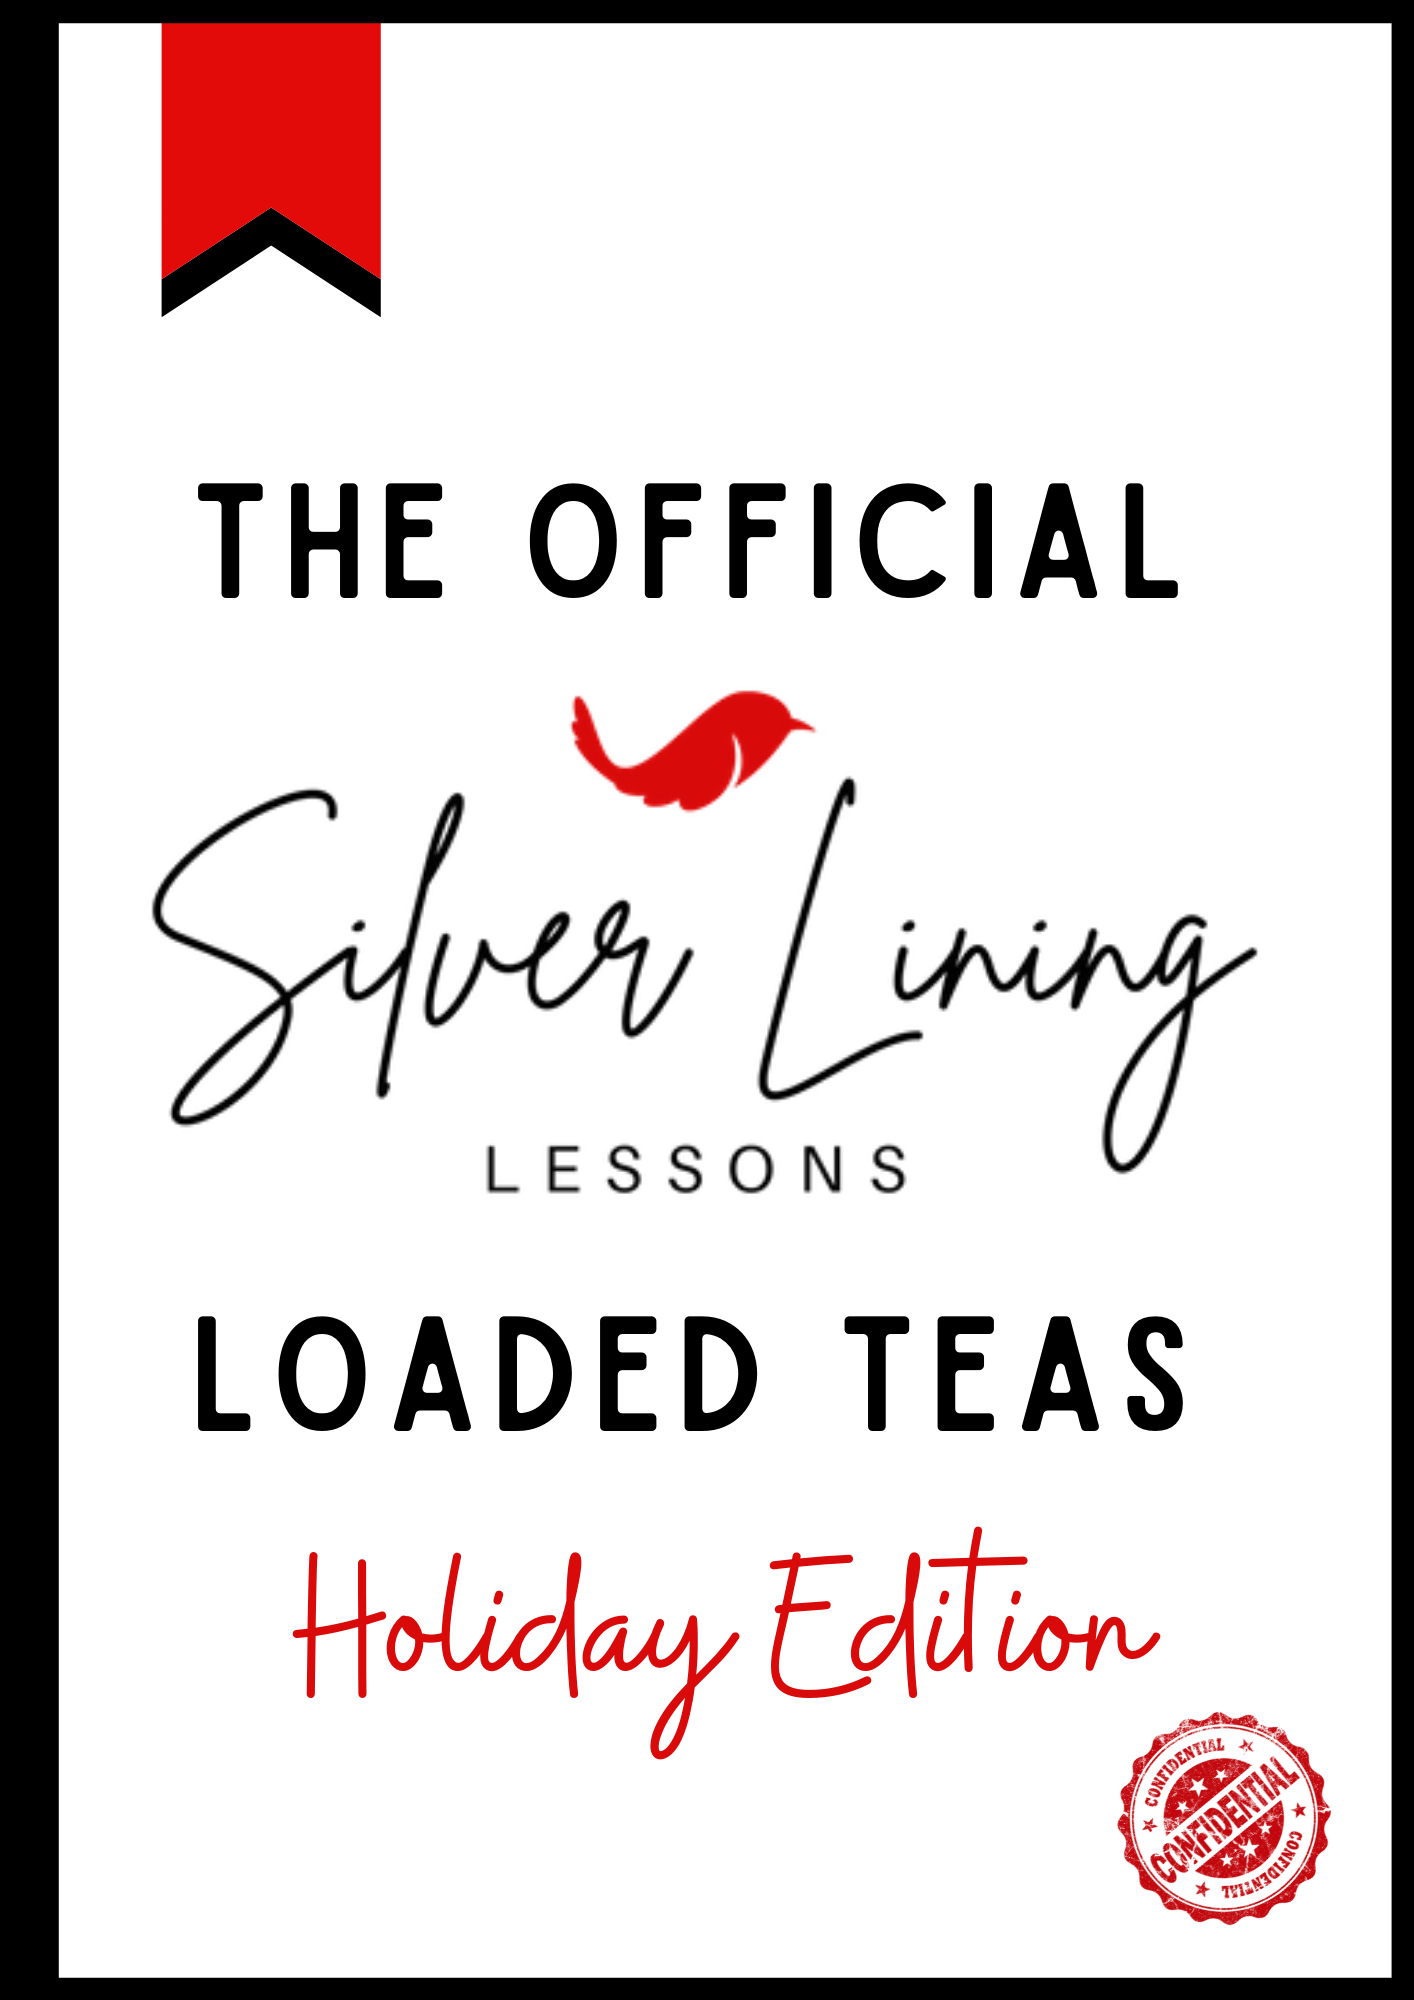 The Official Silver Lining Lessons Tea Recipe Book - HOLIDAY EDITION (download instantly)